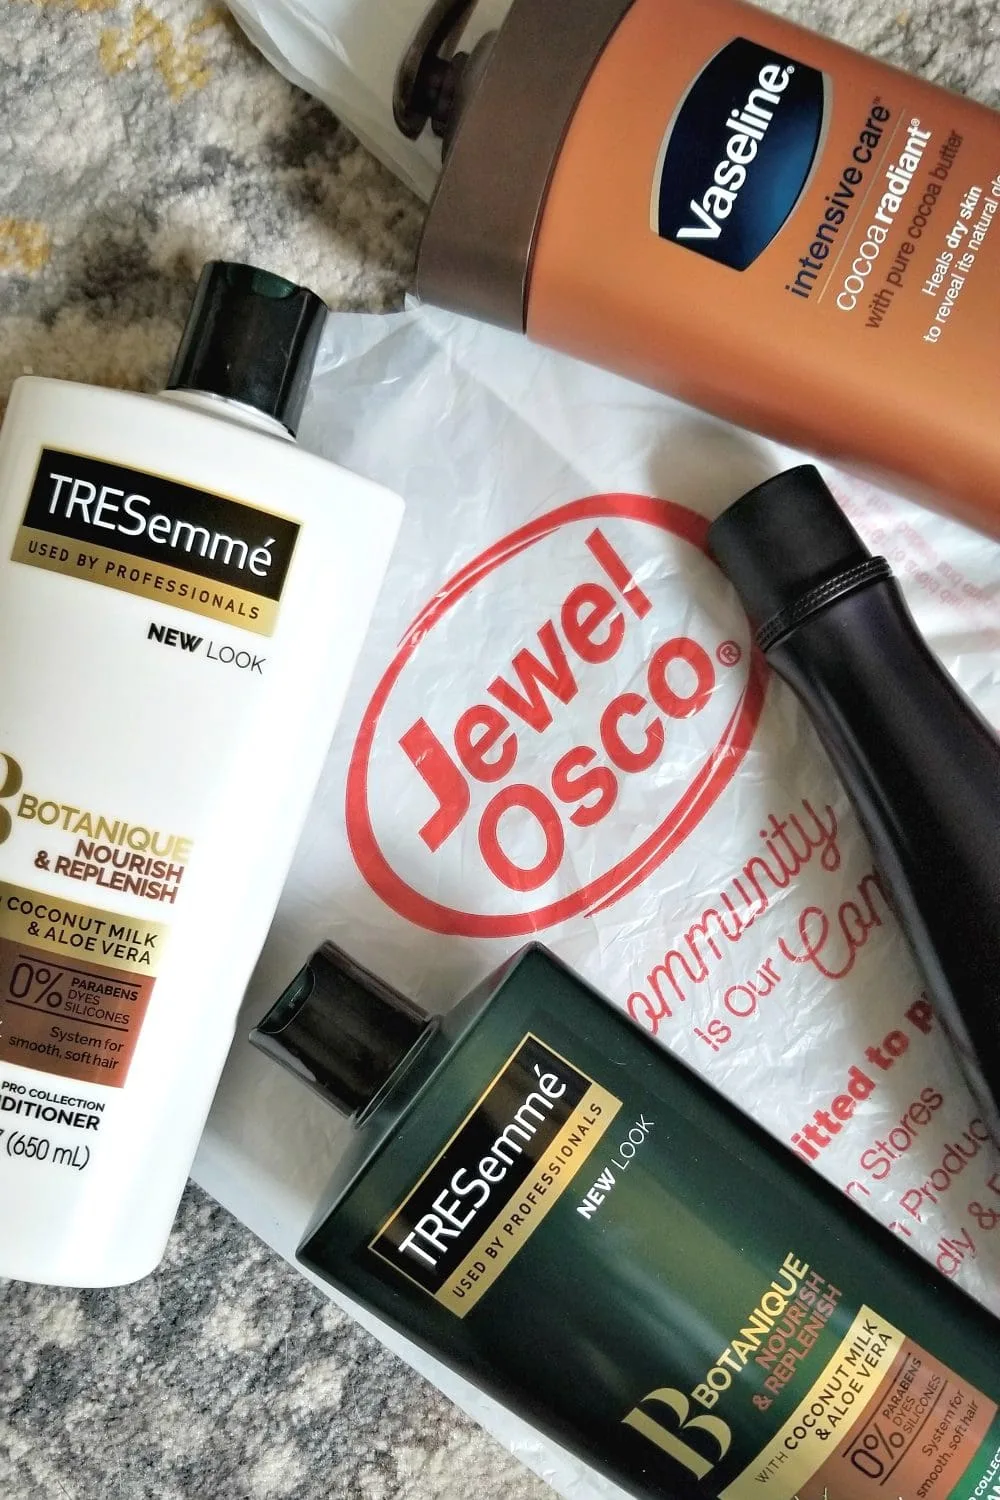 Jewel Osco bag with Tresemme products on top. 